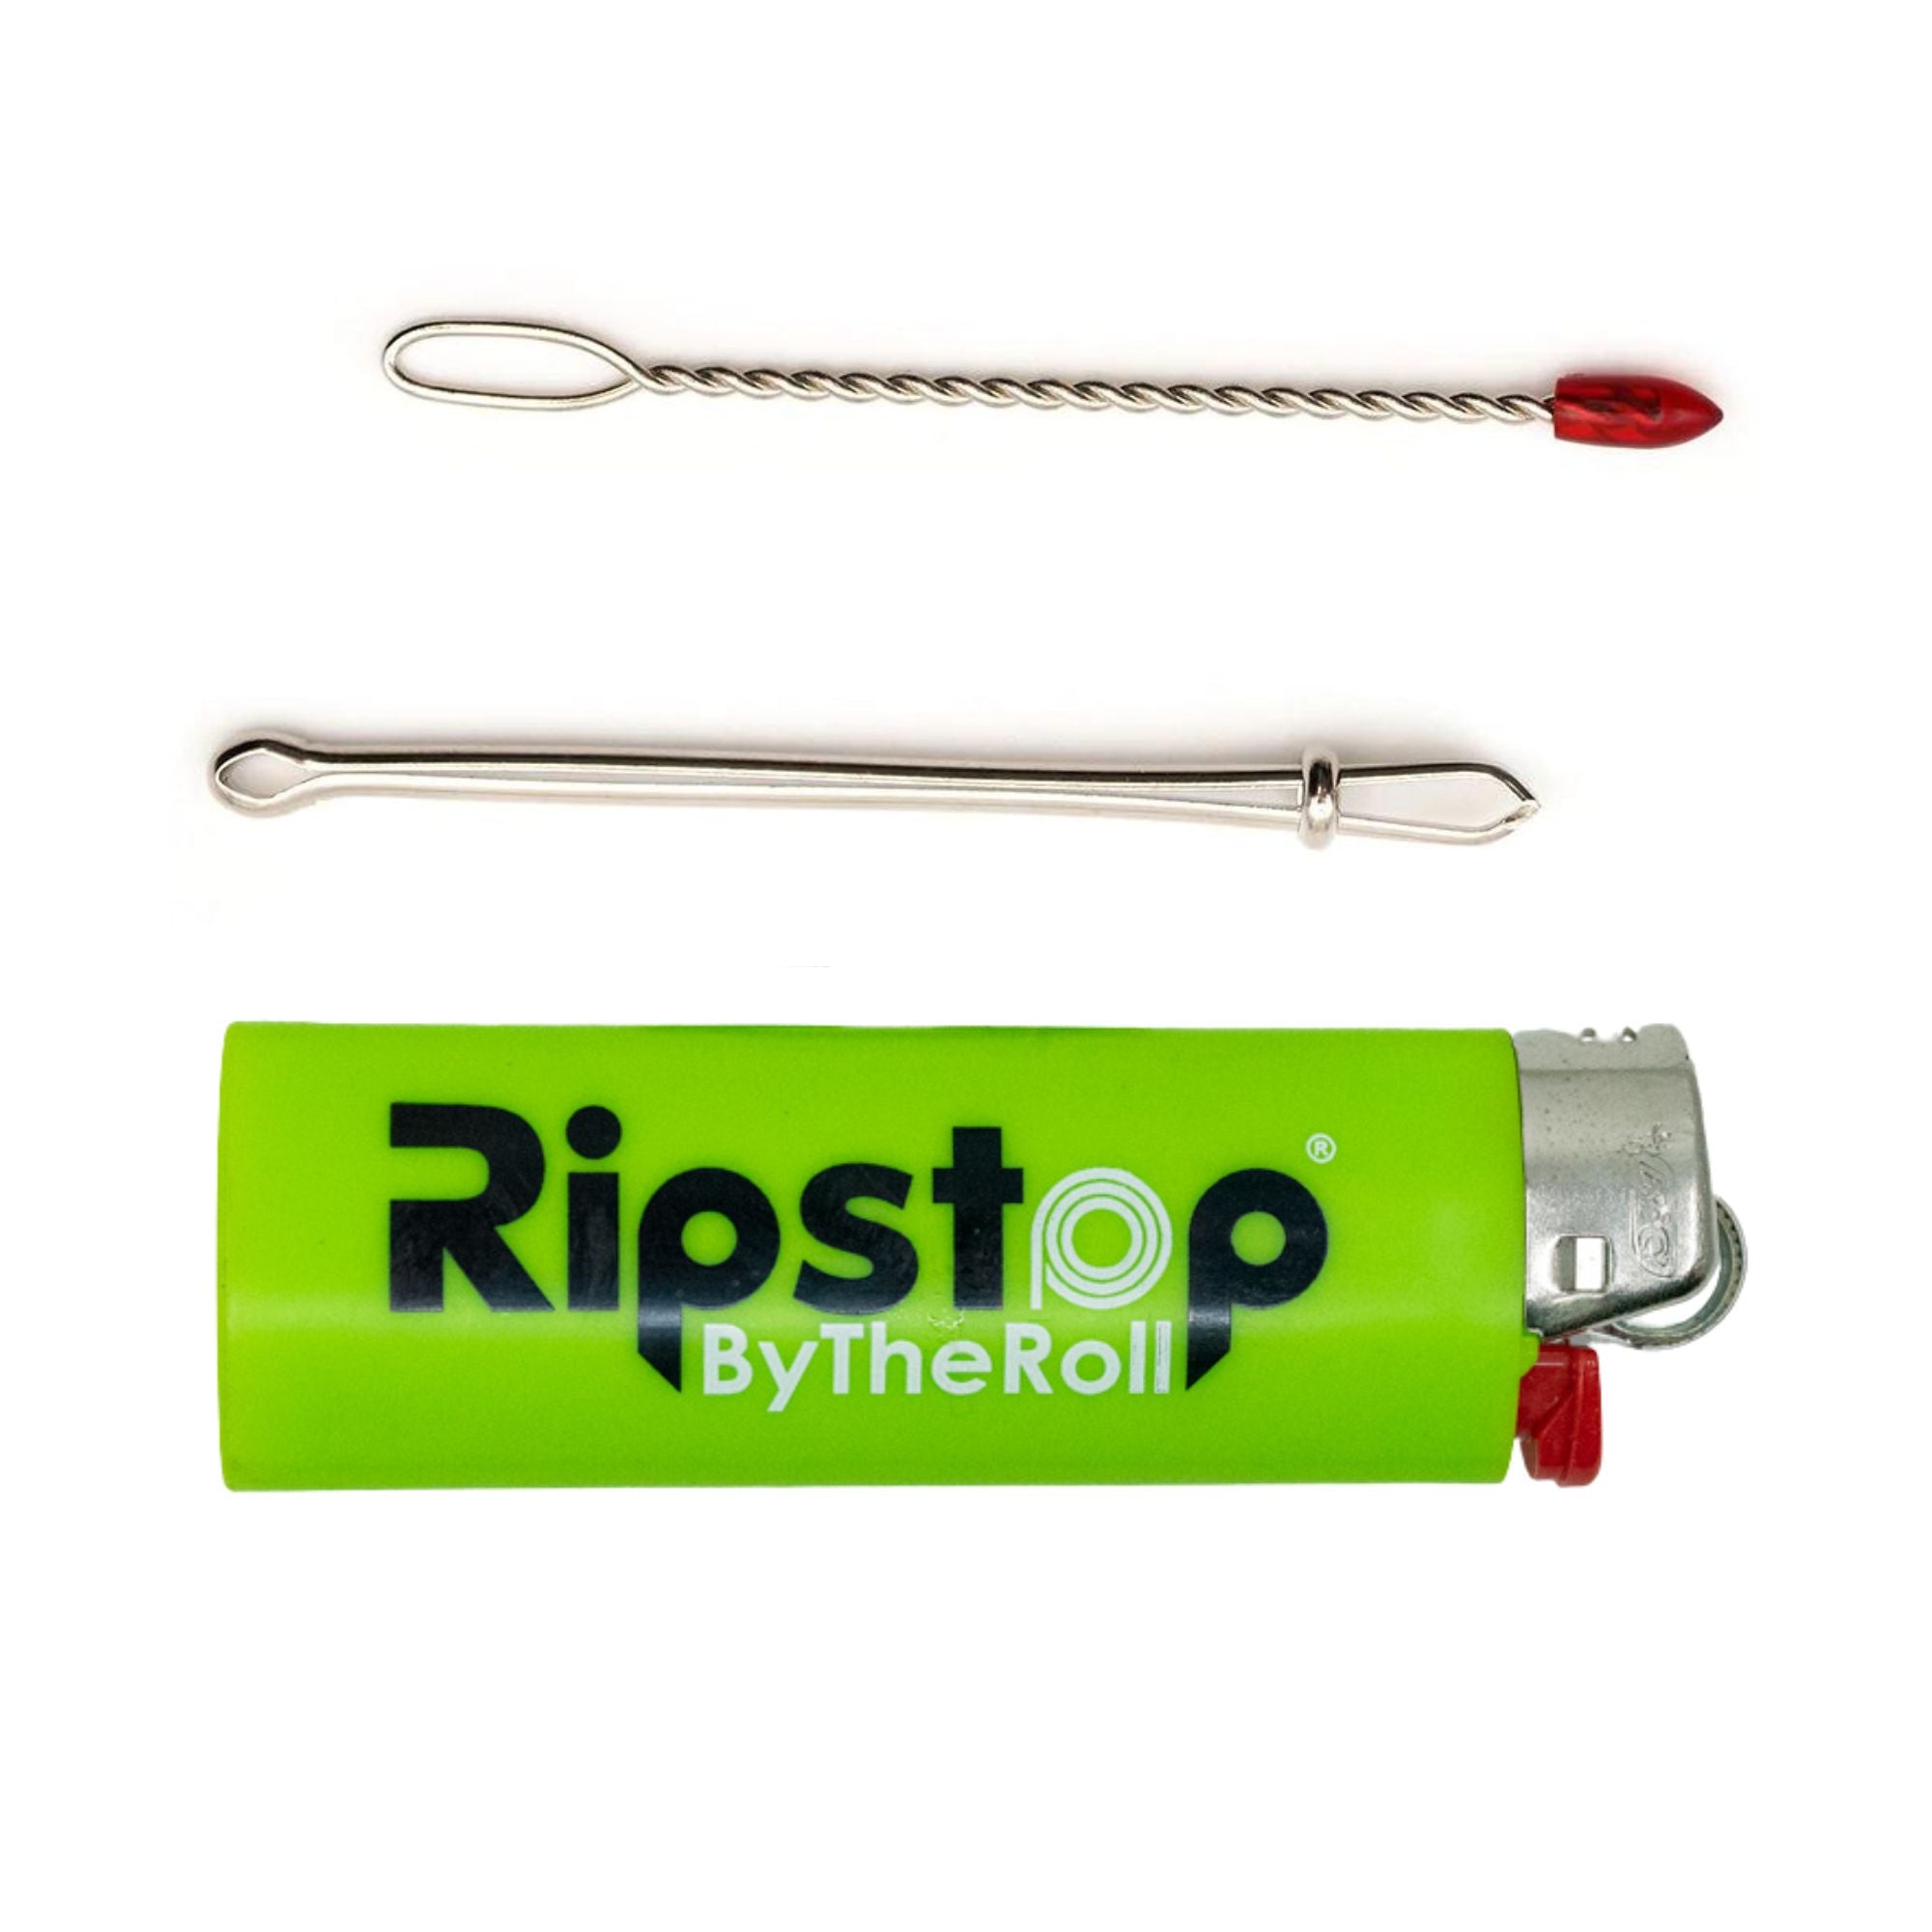 Clover Bodkins - Pack of 2 - Ripstop by the Roll